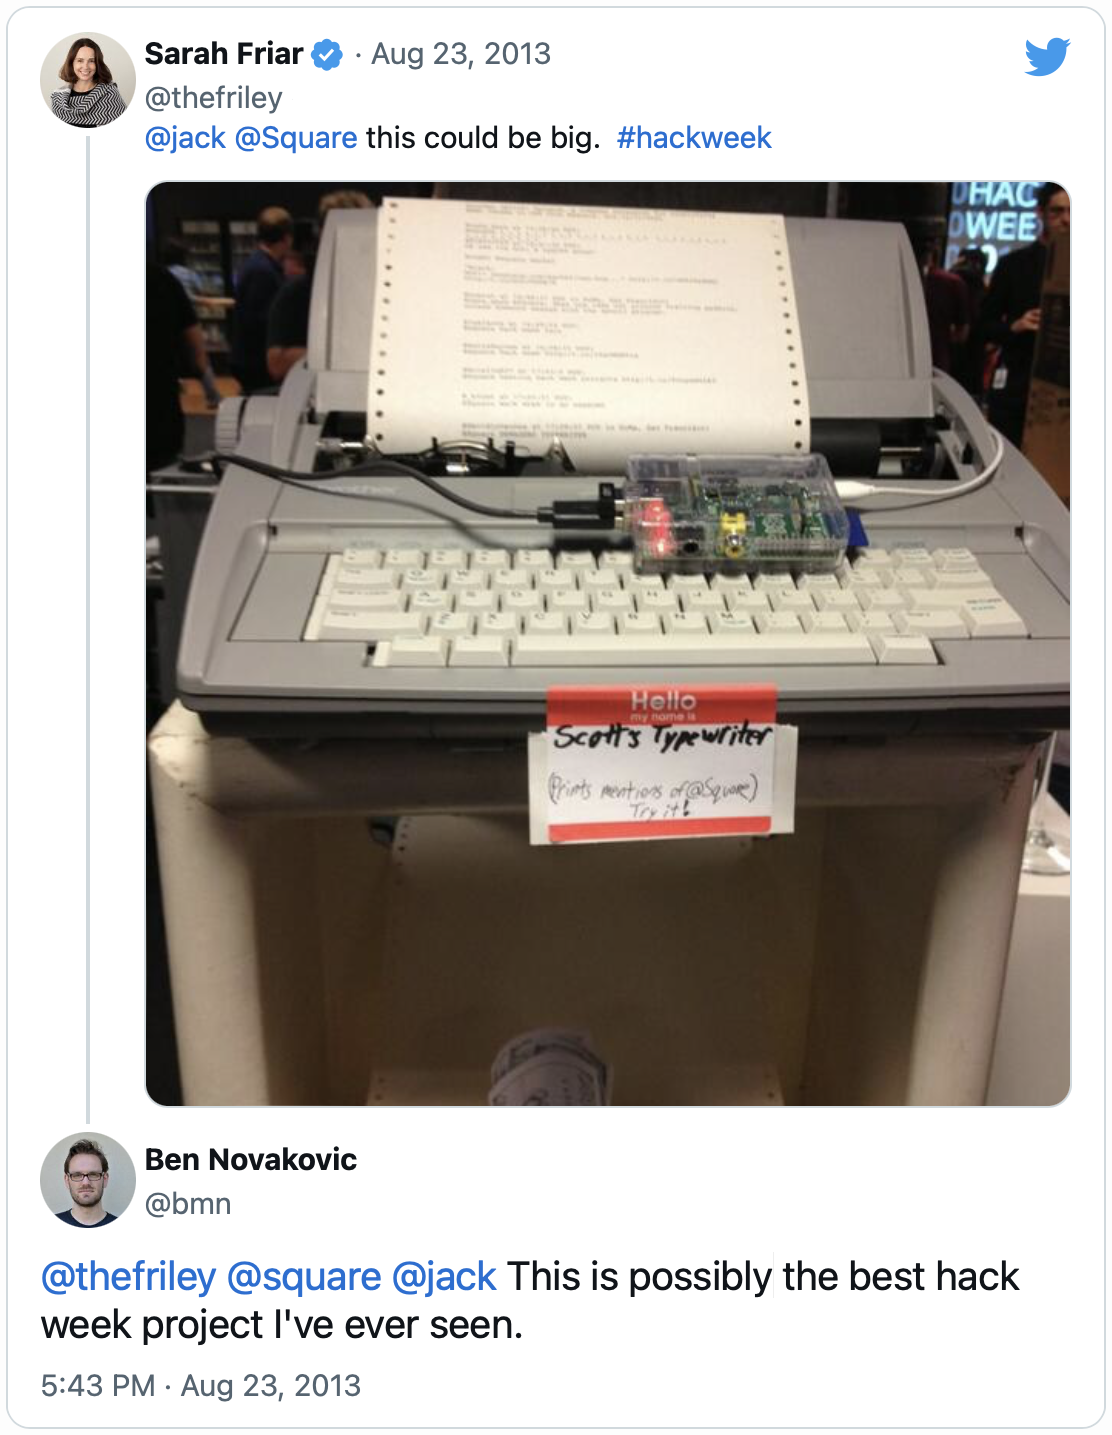 Tweet by Ben Novakovic (@bmn): "@thefriley @square @jack This is possibly the best hack week project I've ever seen." in response to @thefriley: "@square @jack this could be big #hackweek" with a photo of the typewriter, loaded with continuous feed paper, printing out tweets mentioning @square with a Raspberry Pi perched on top and a sticker saying "Scott's Typewriter (Prints mentions of @Square, try it!)"